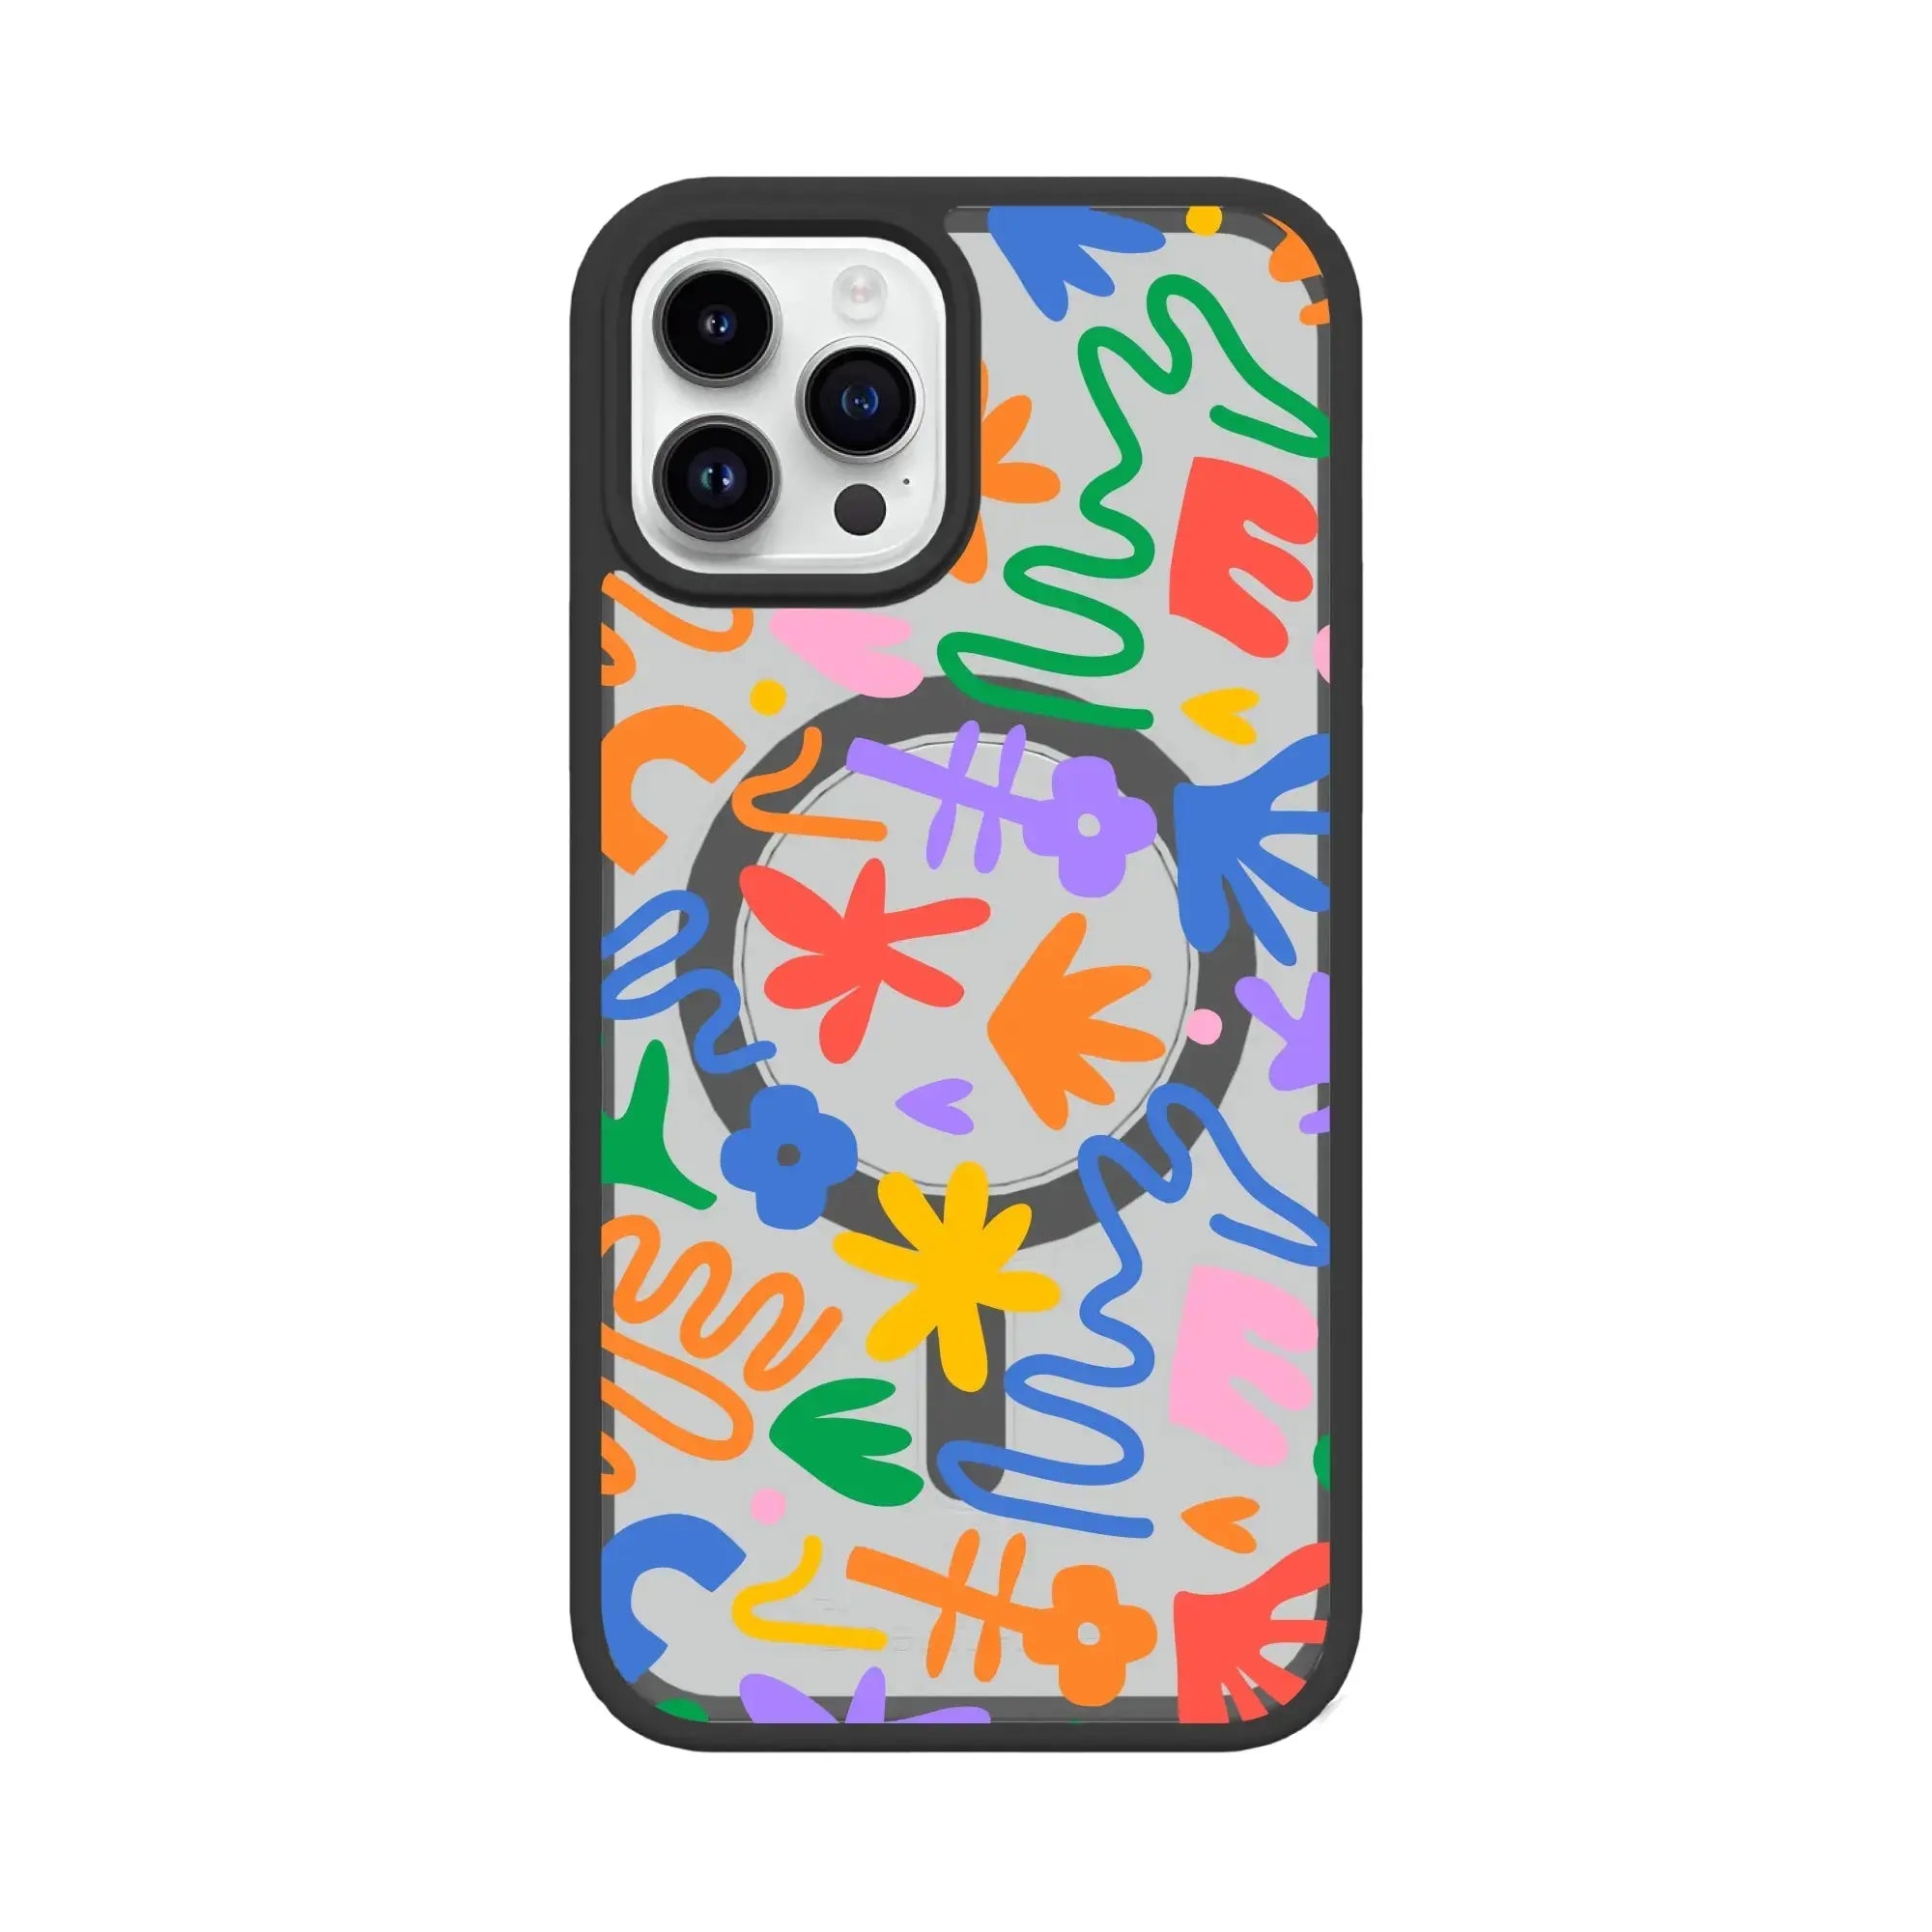 Garden | Shapes & Colors | Custom MagSafe Case Design for Apple iPhone 12 Series